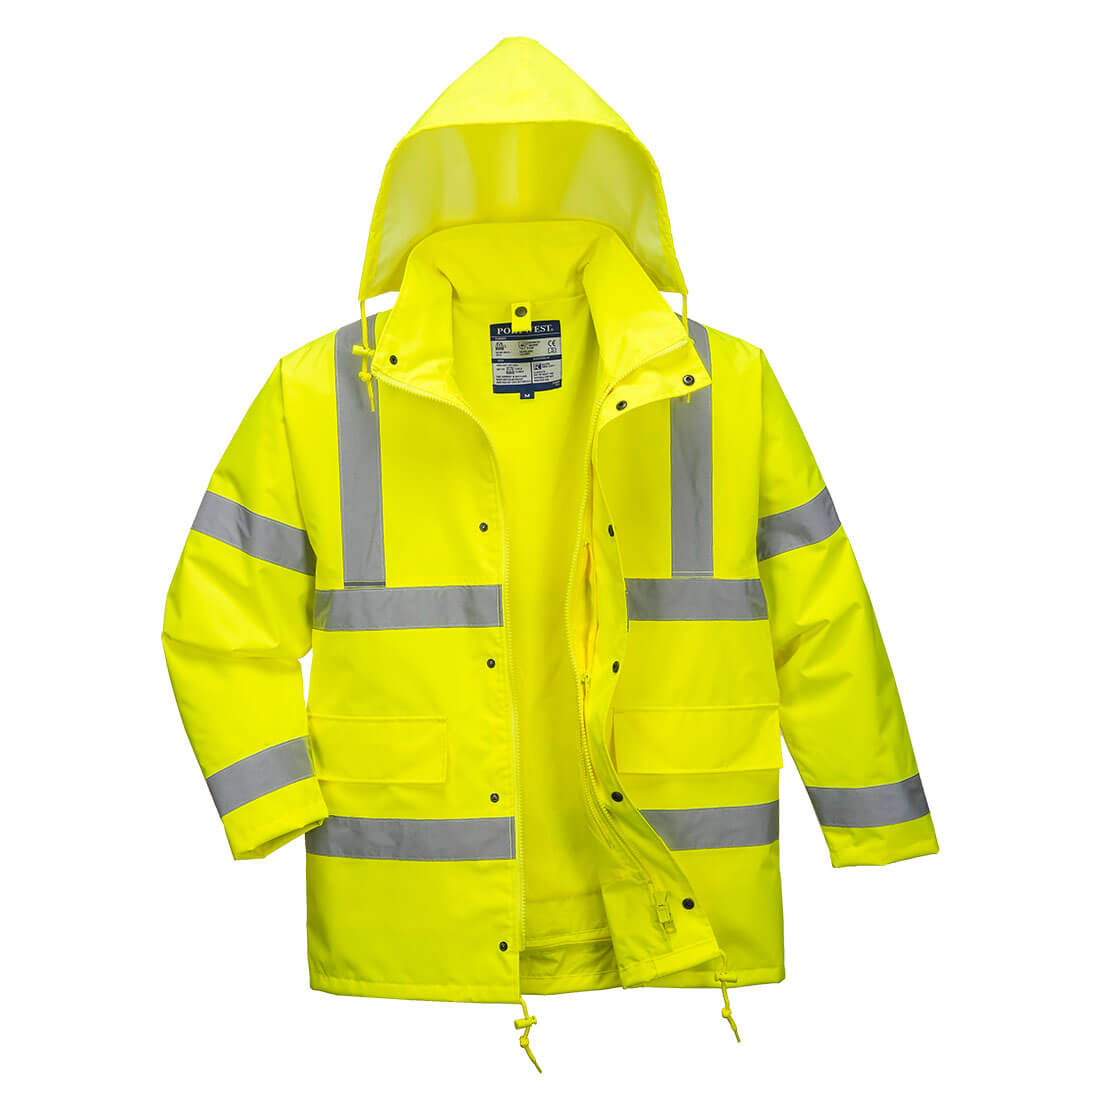 Image of Oxford Weave 300D Class 3 Hi Vis 4-in1 Traffic Jacket Yellow XS